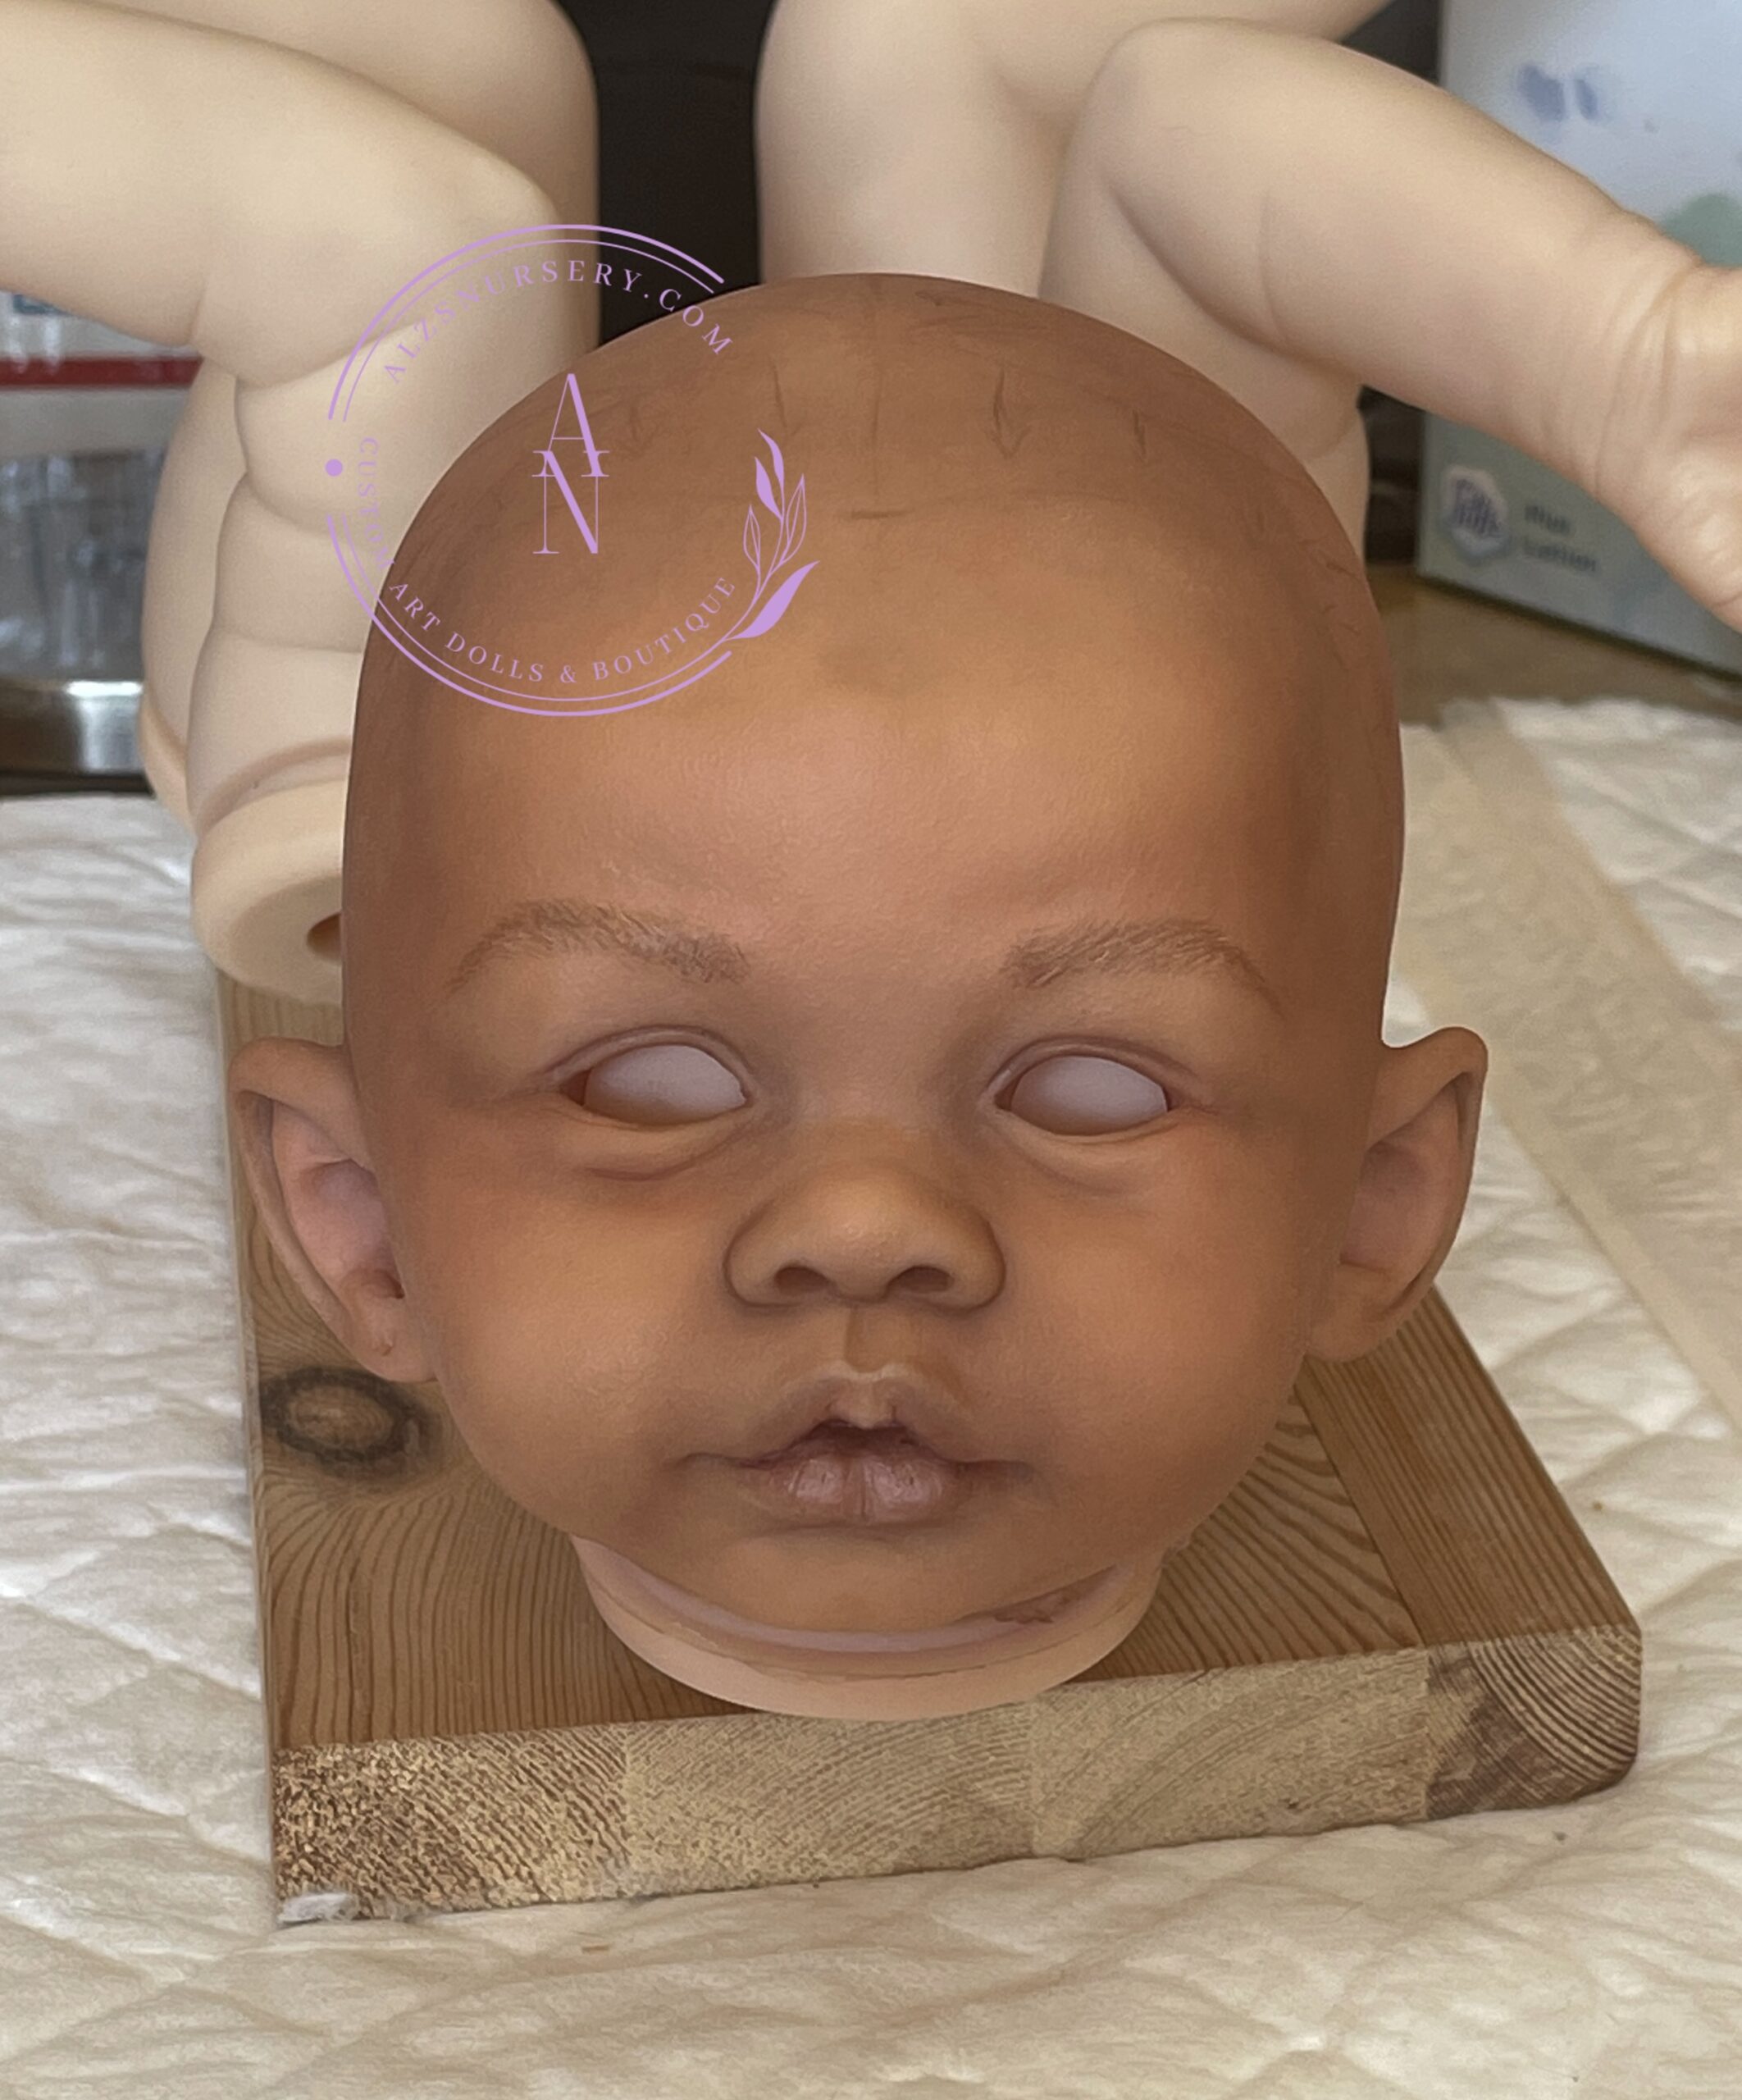 Zippy sculpt by Andrea Arcello, brought to life by Ginger Kelly with Alz’s Nursery